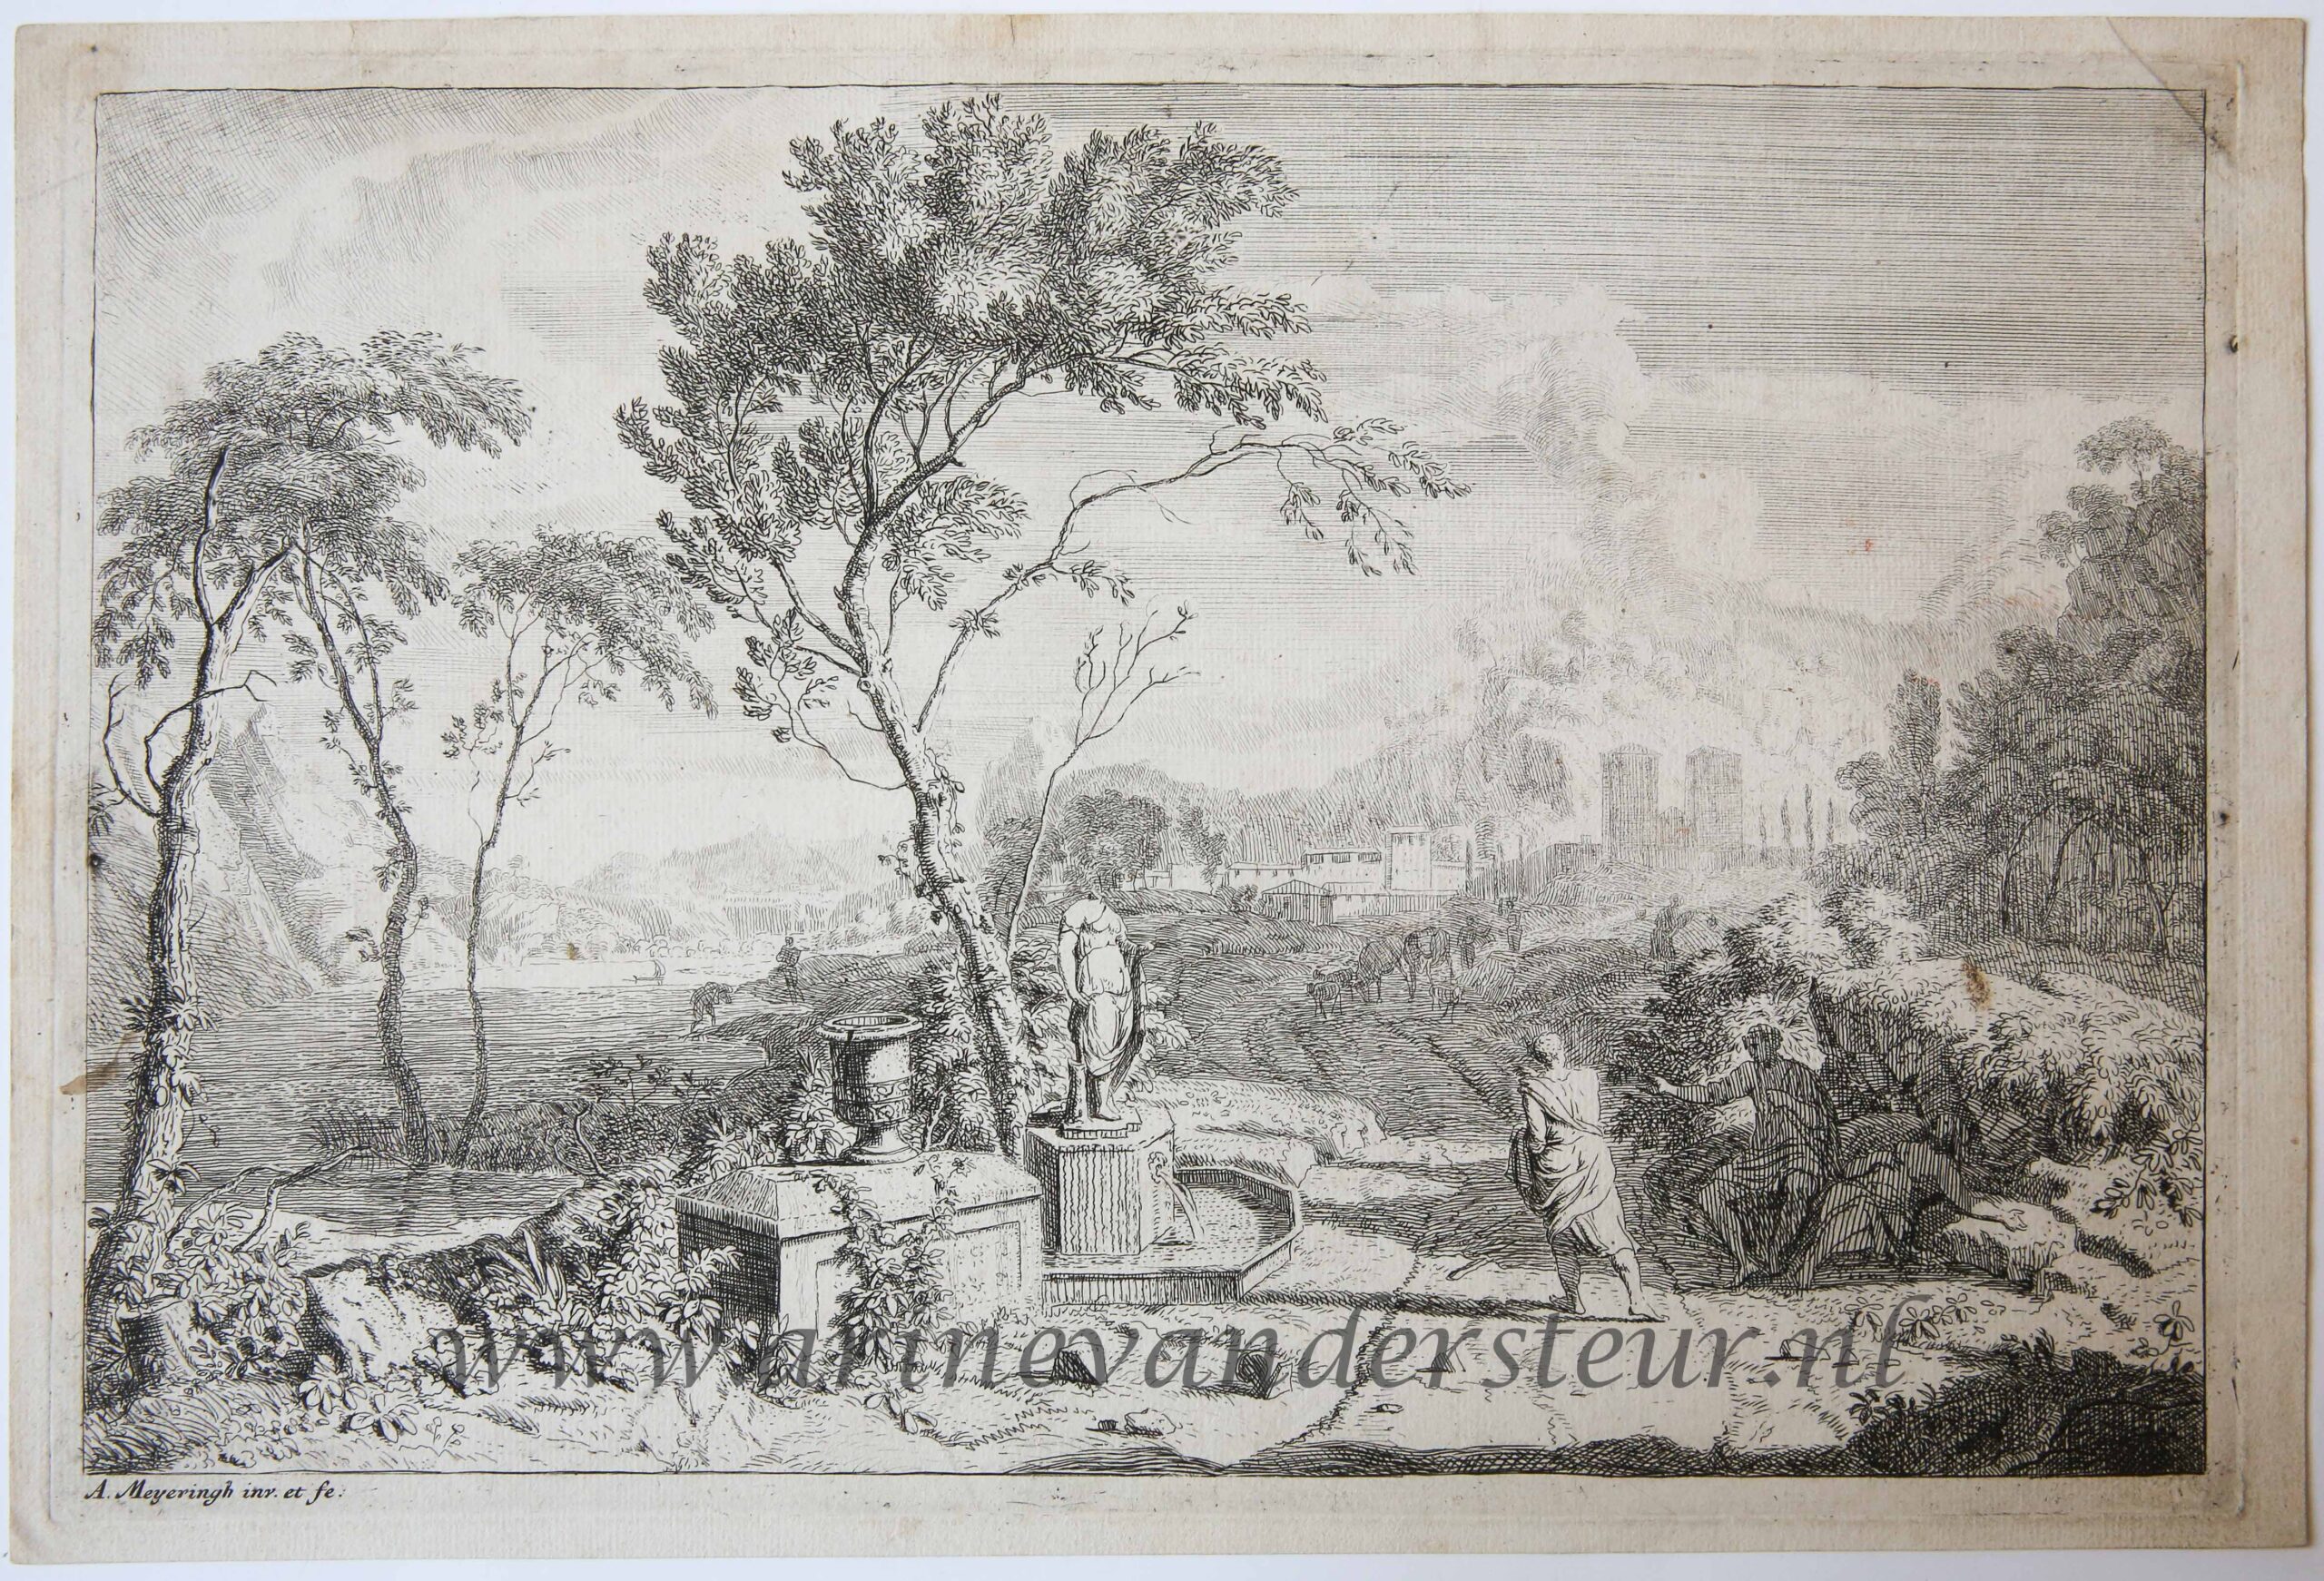 [Antique print, etching/ets] Italian landscape with a statue, published before 1700.